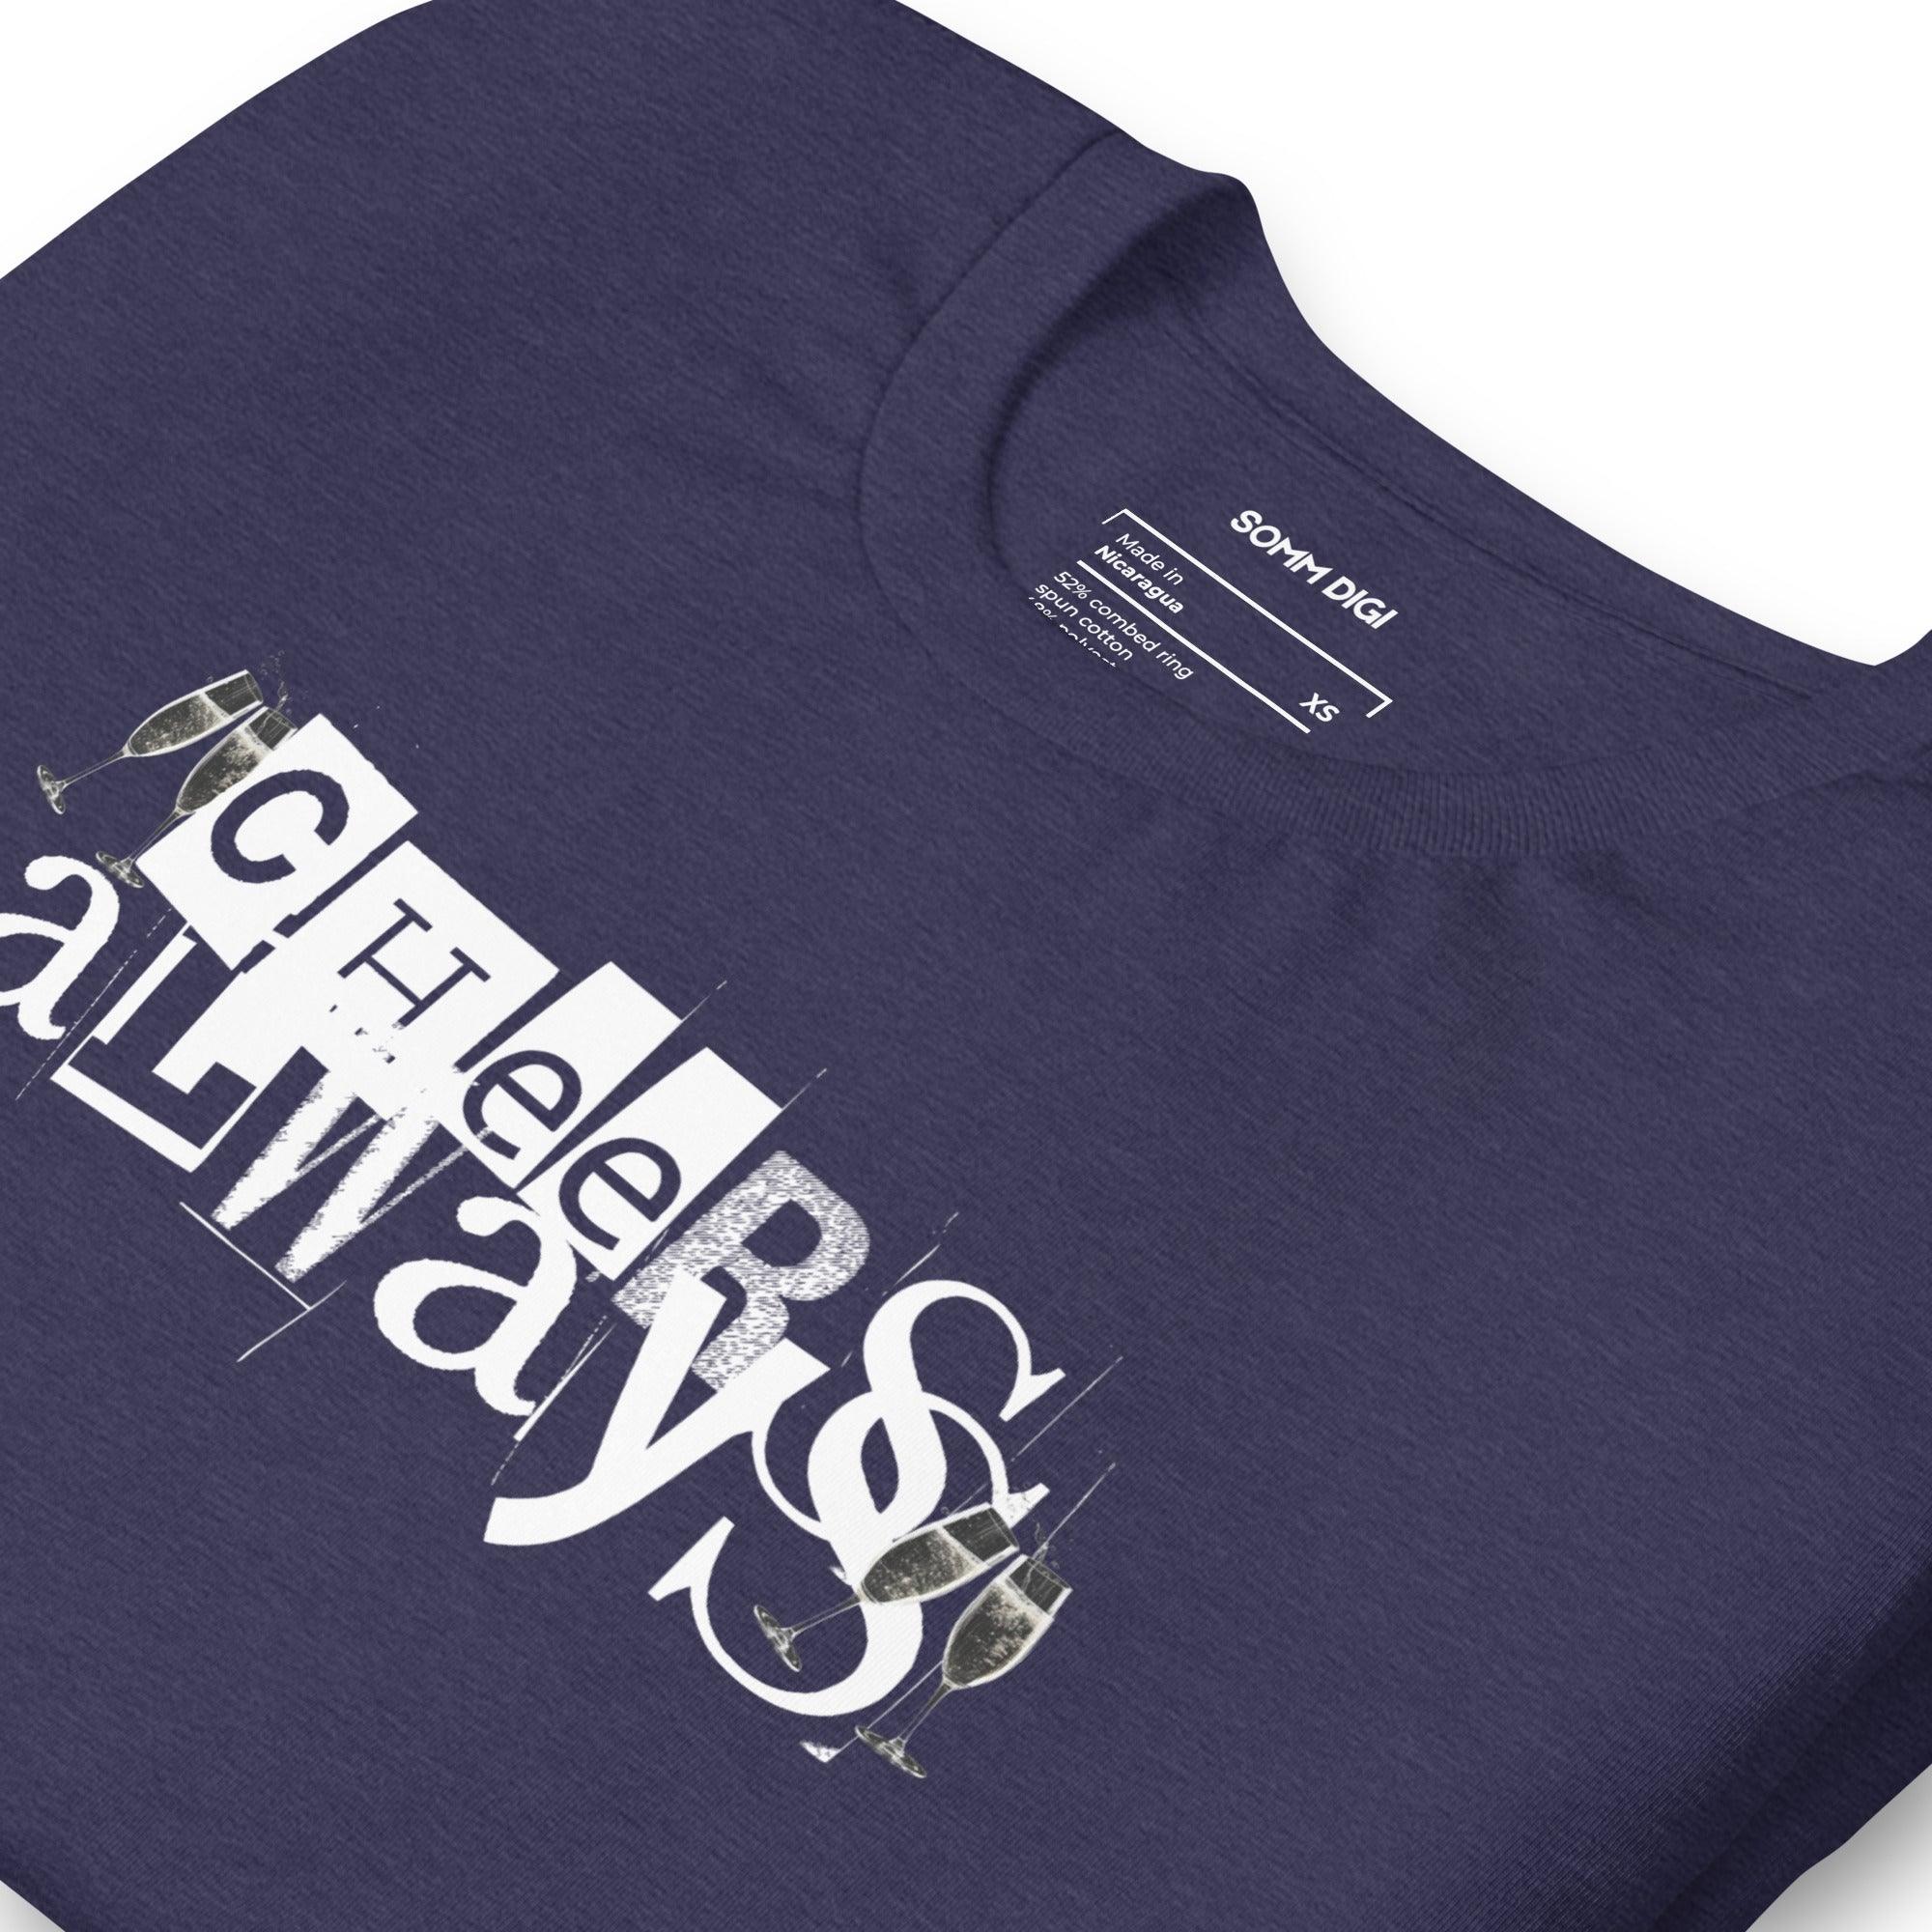 Cheers Always T-Shirt - Timeless Unisex Wine Tee for Every Occasion - SOMM DIGI